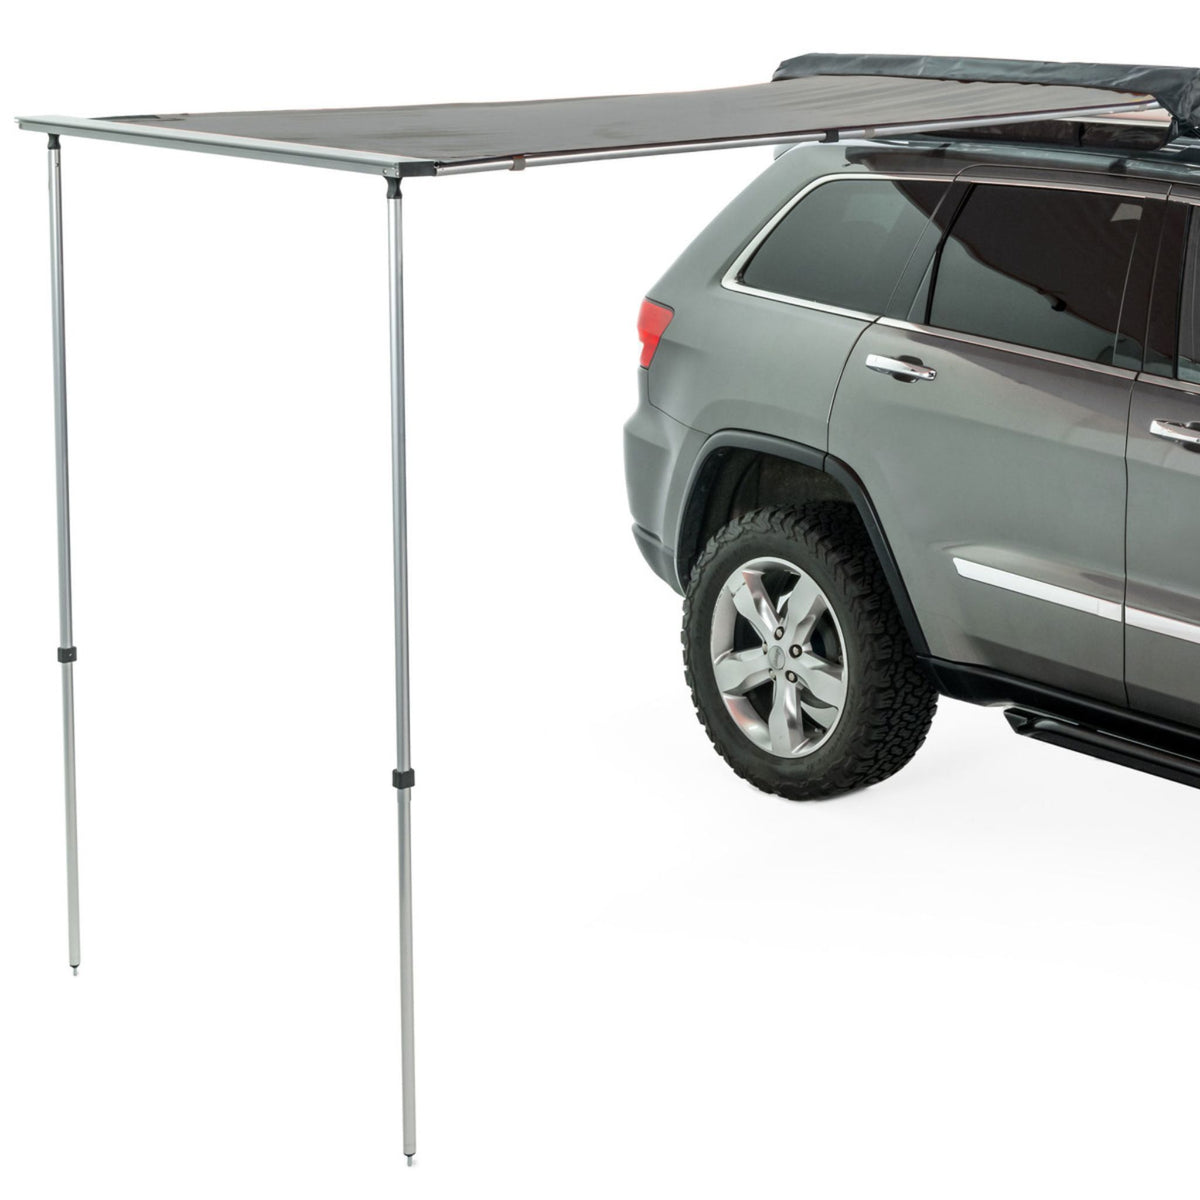 Thule OverCast Lightweight Awning - 4.5 ft - 901084